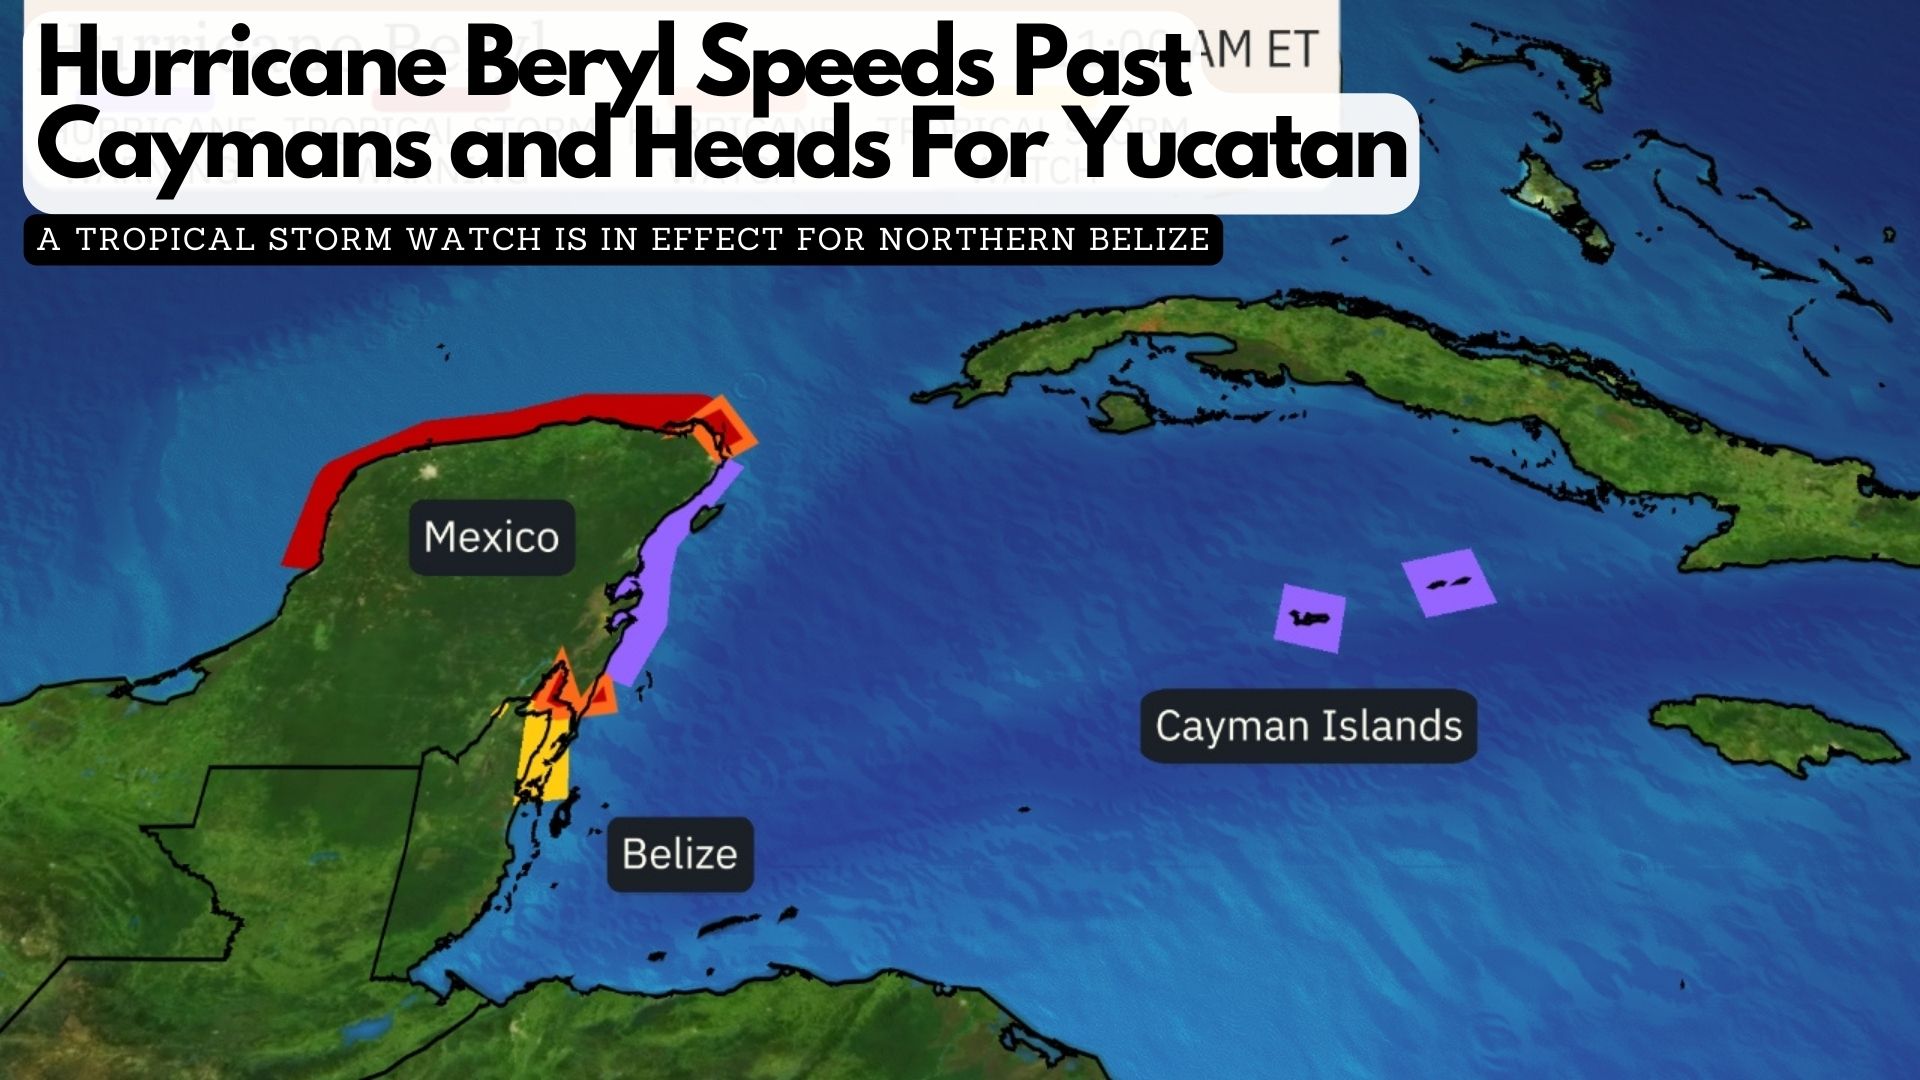 Hurricane Beryl Speeds Past Caymans and Heads For Yucatan